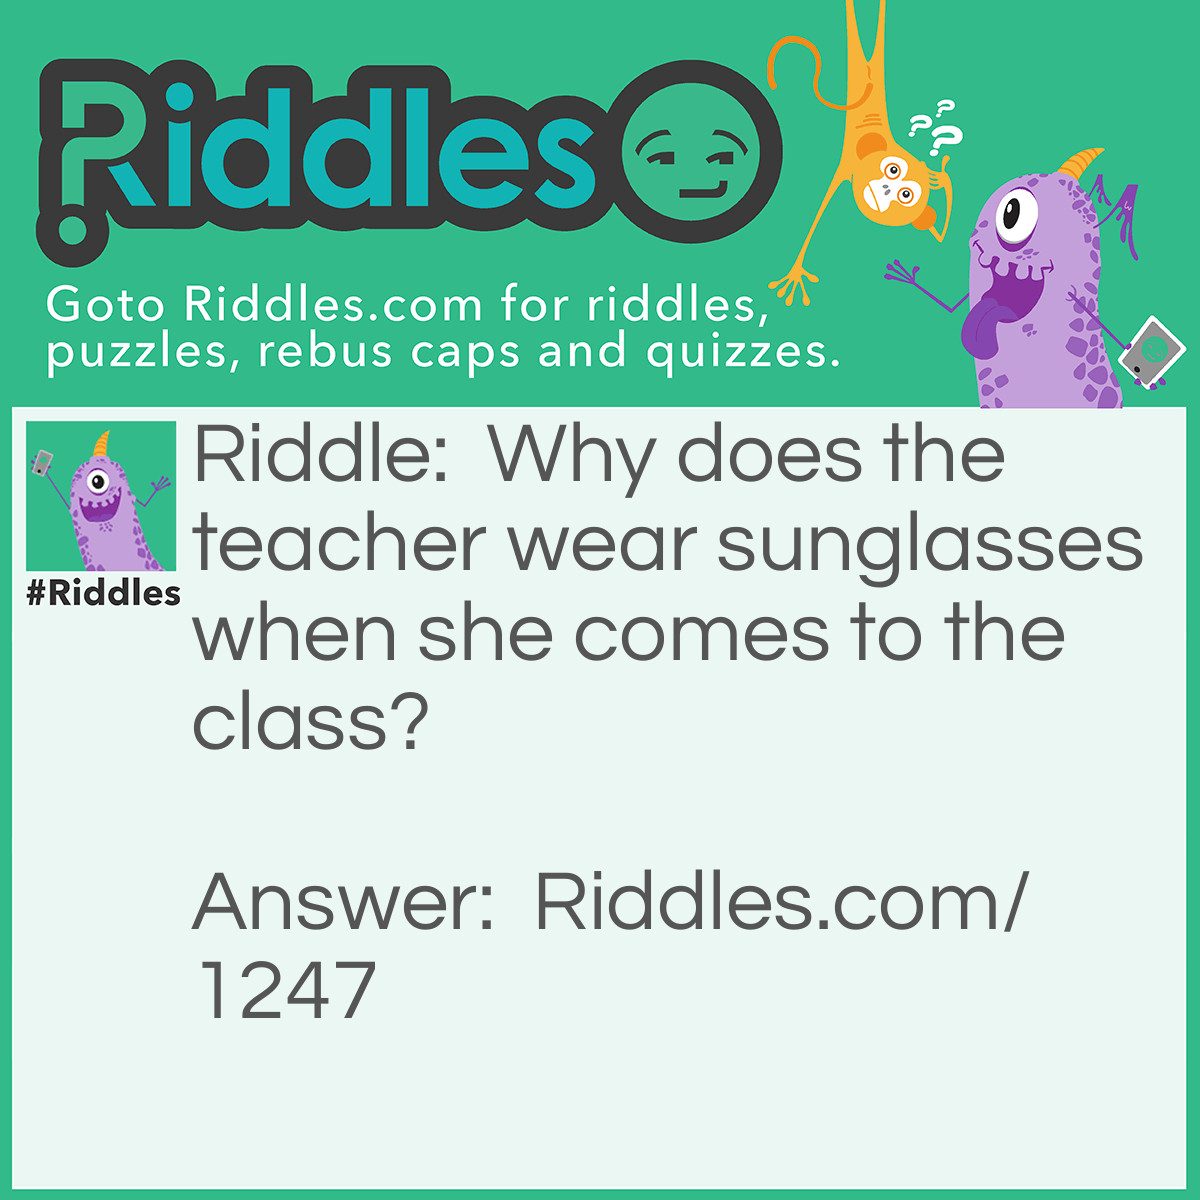 Riddle: Why does the <a title="Riddles For Kids" href="/riddles-for-kids">teacher</a> wear sunglasses when she comes to the class? Answer: Because the students are bright.